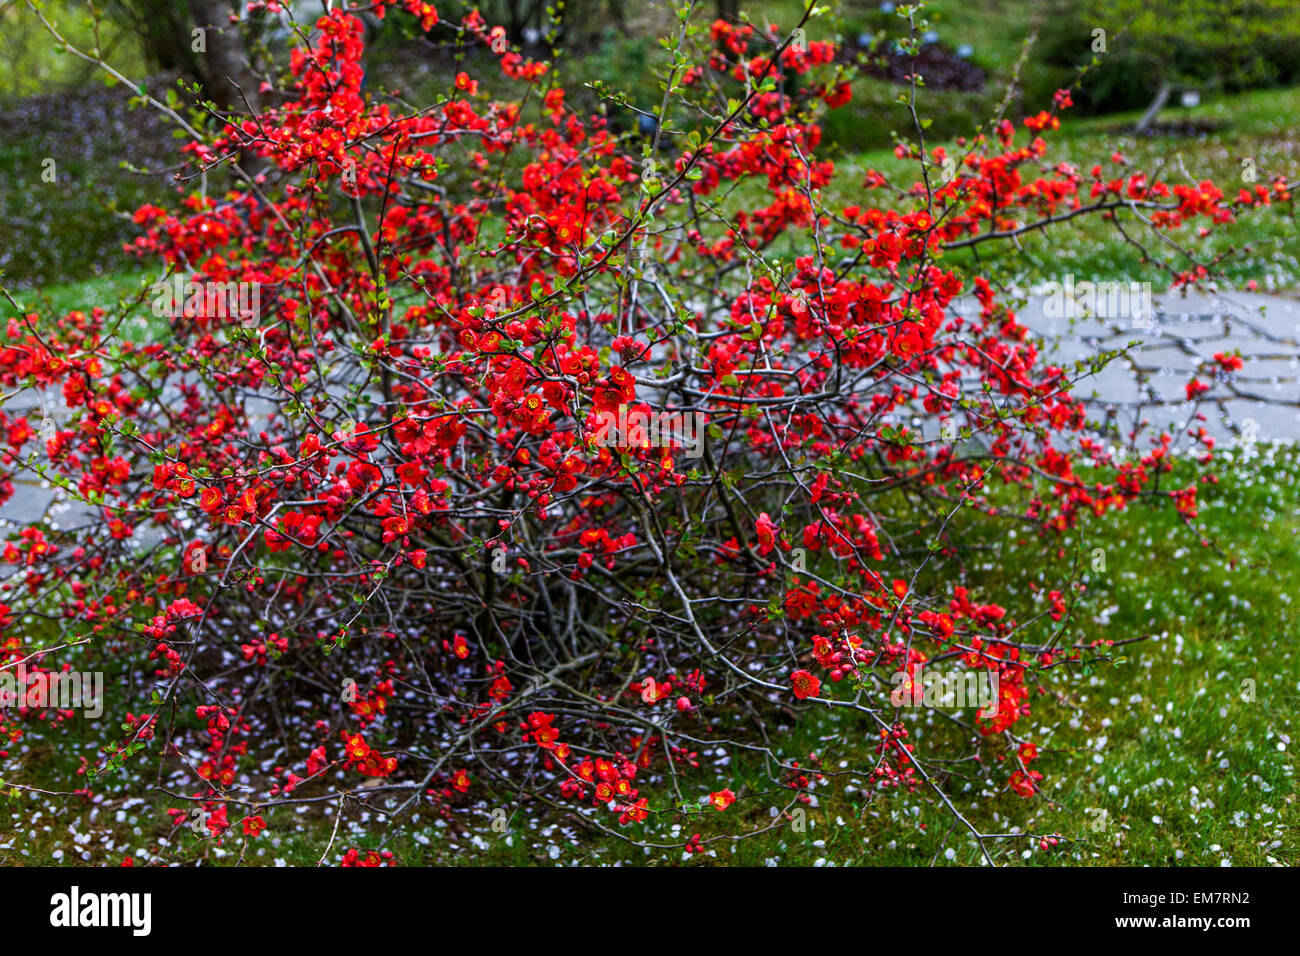 Flowering Japanese quince Chaenomeles japonica blossoms on a shrub in early spring growing by the garden path Stock Photo